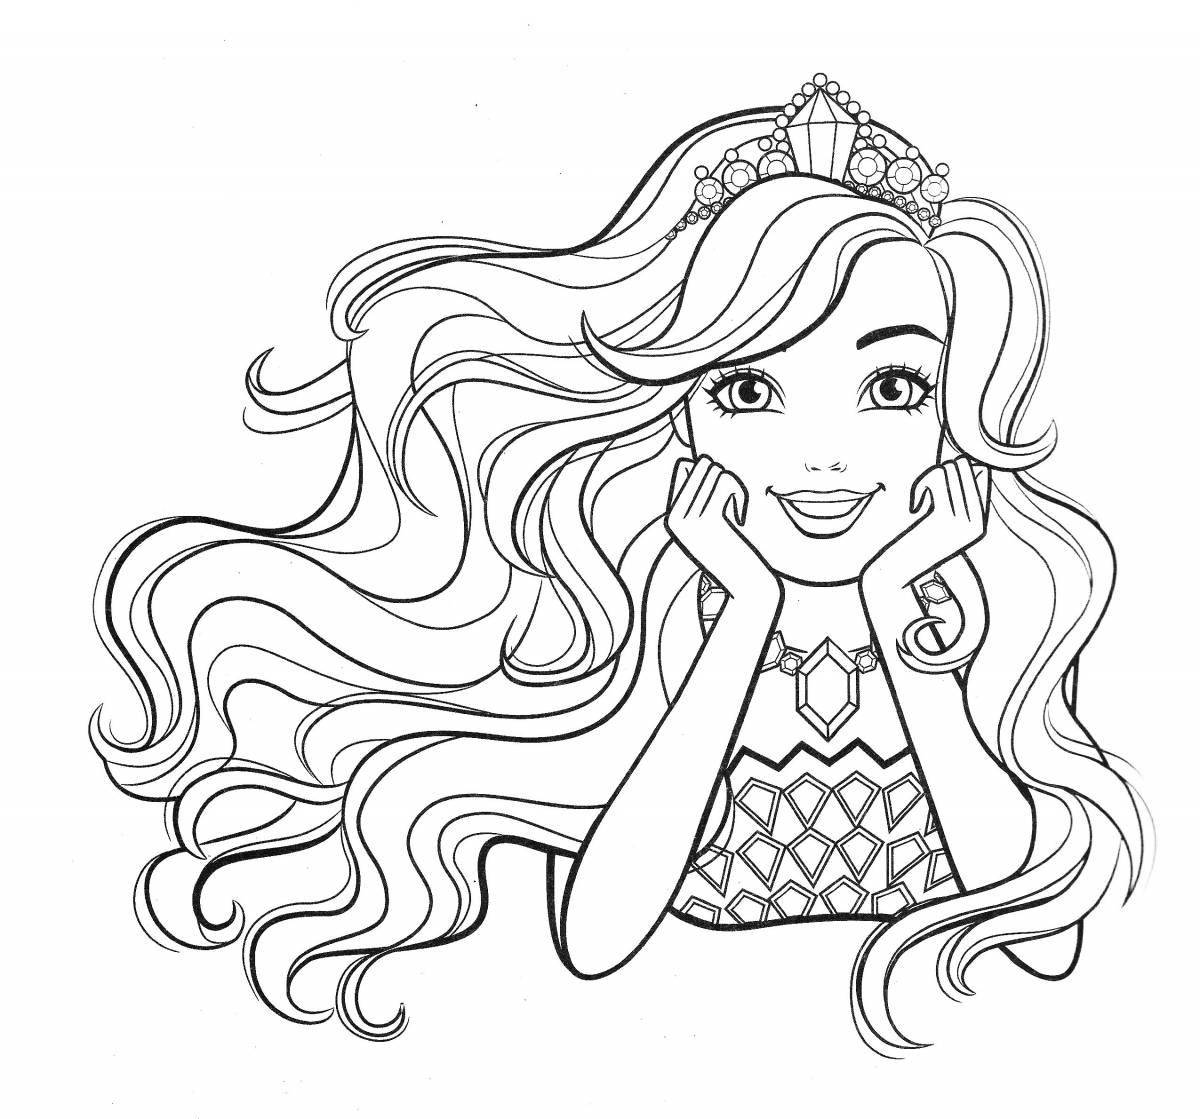 Coloring book shiny chelsea doll